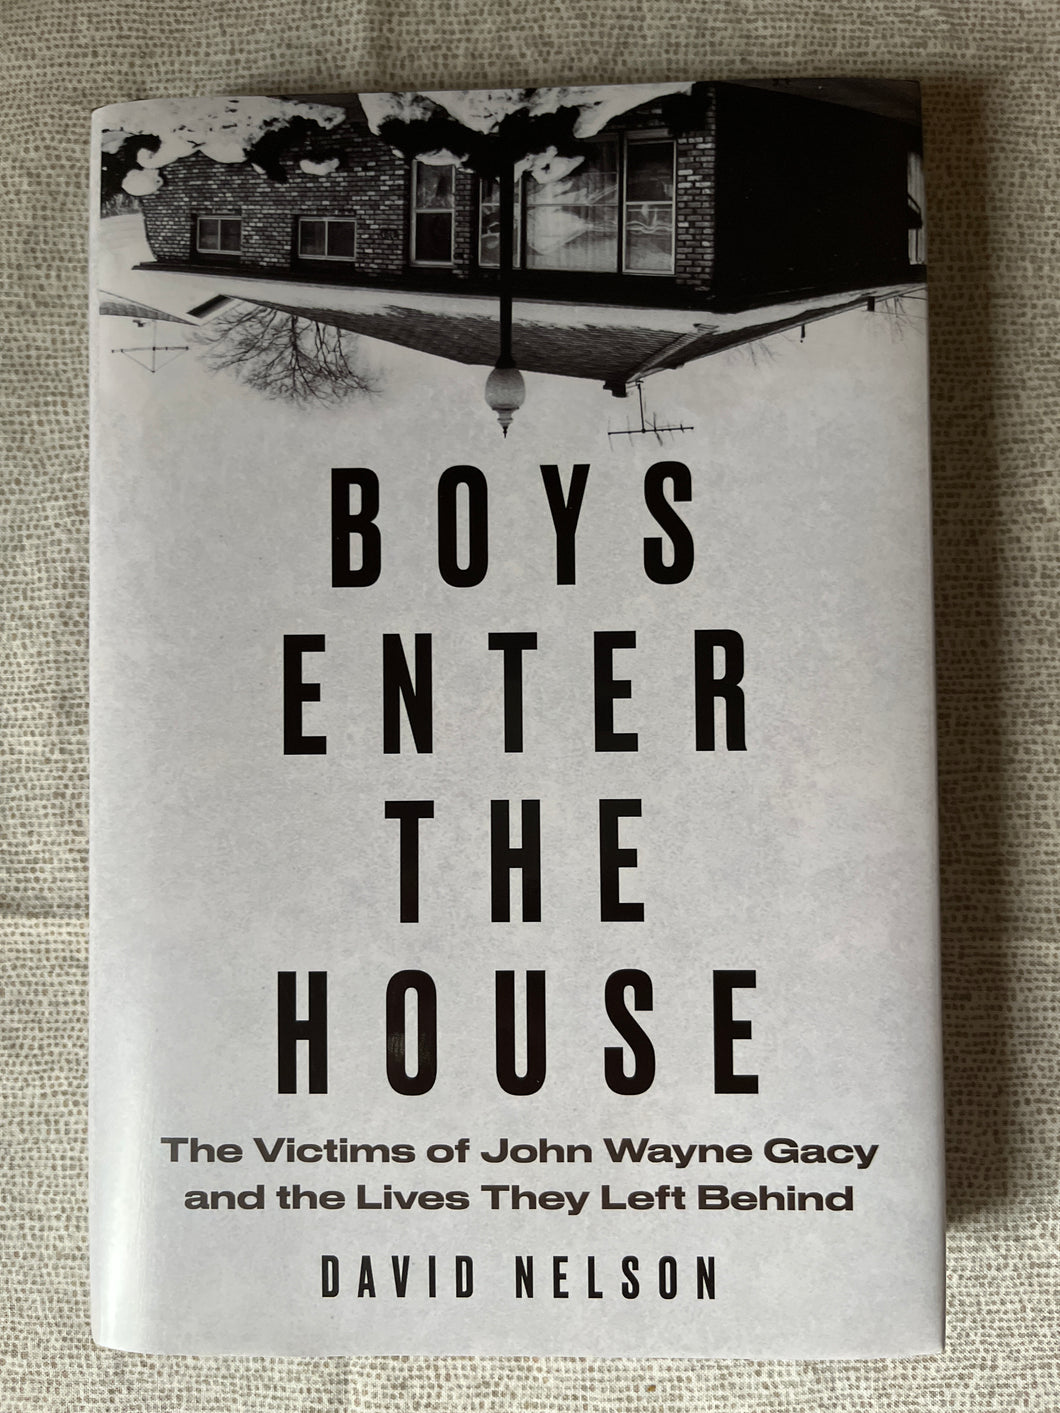 Boys Enter The House: The Victims of John Wayne Gacy and the Lives They Left Behind